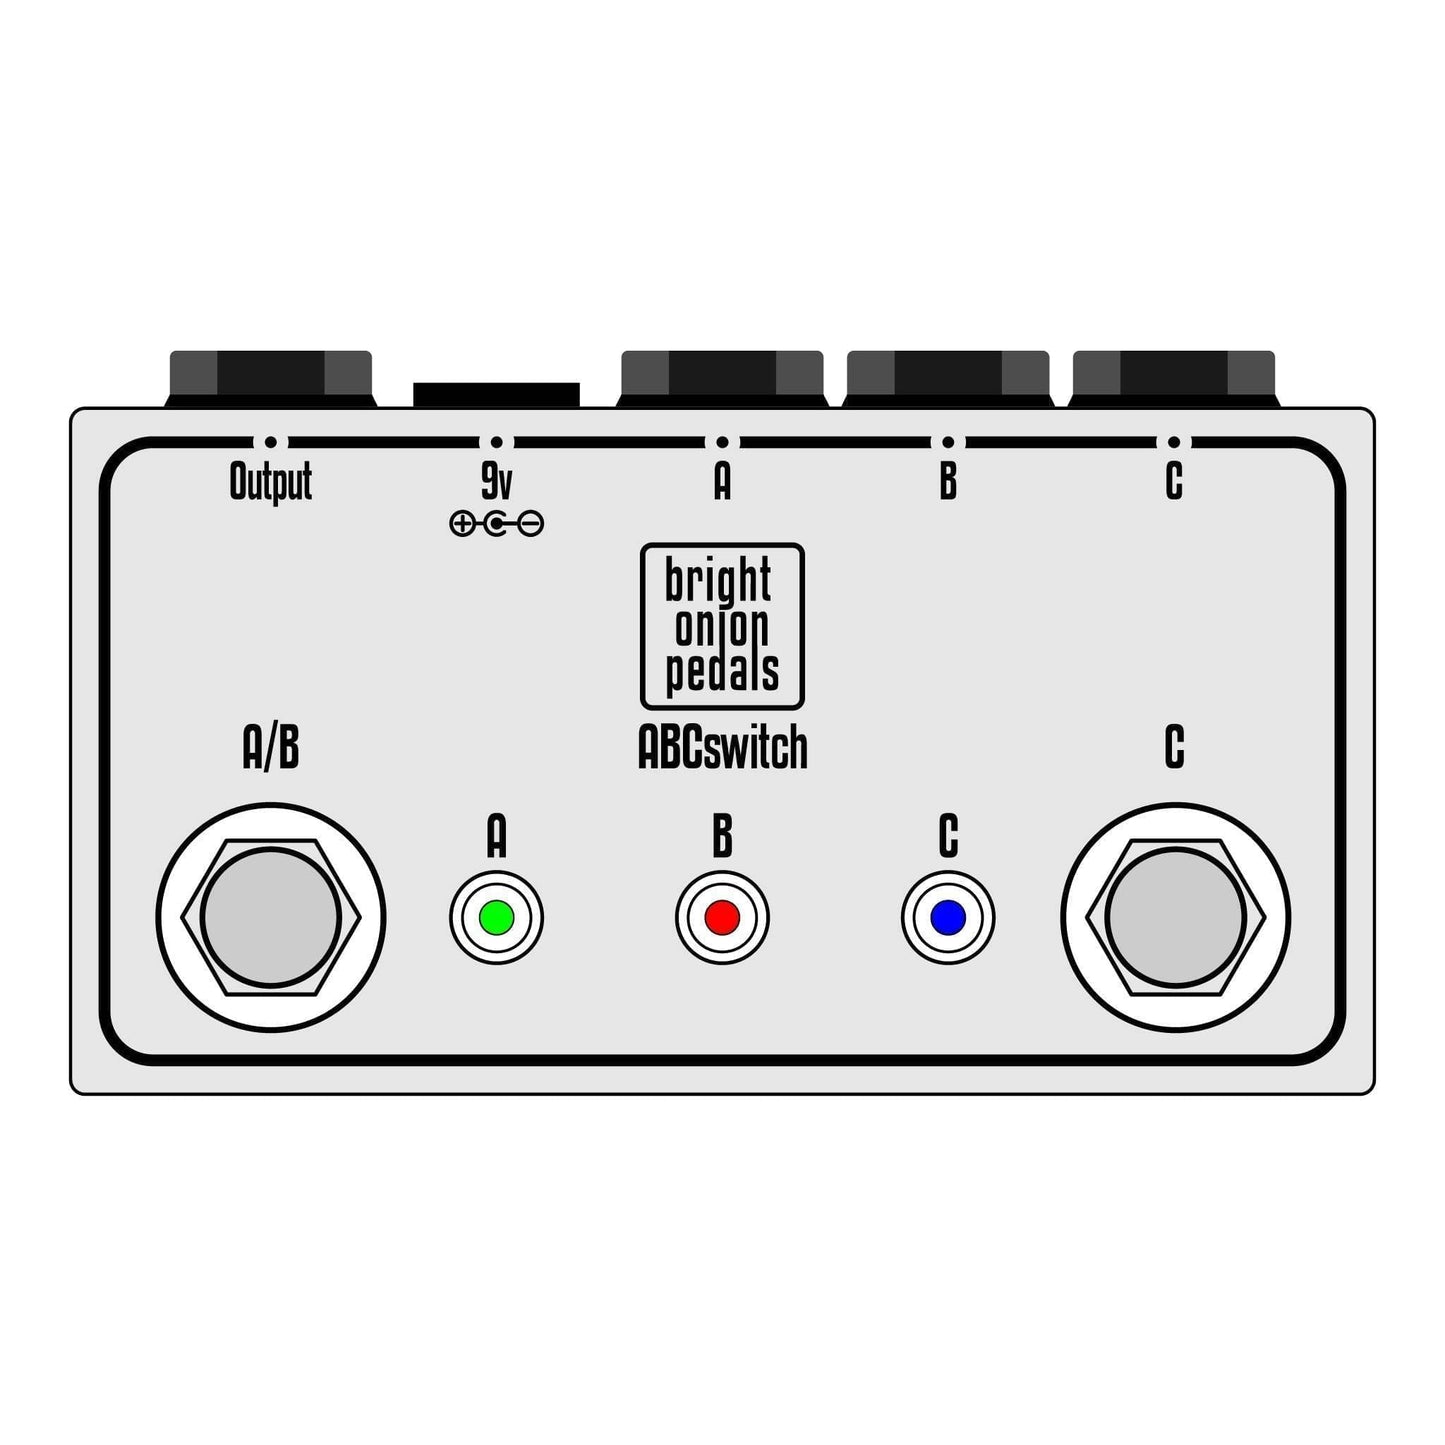 ABC Switch with Three Inputs